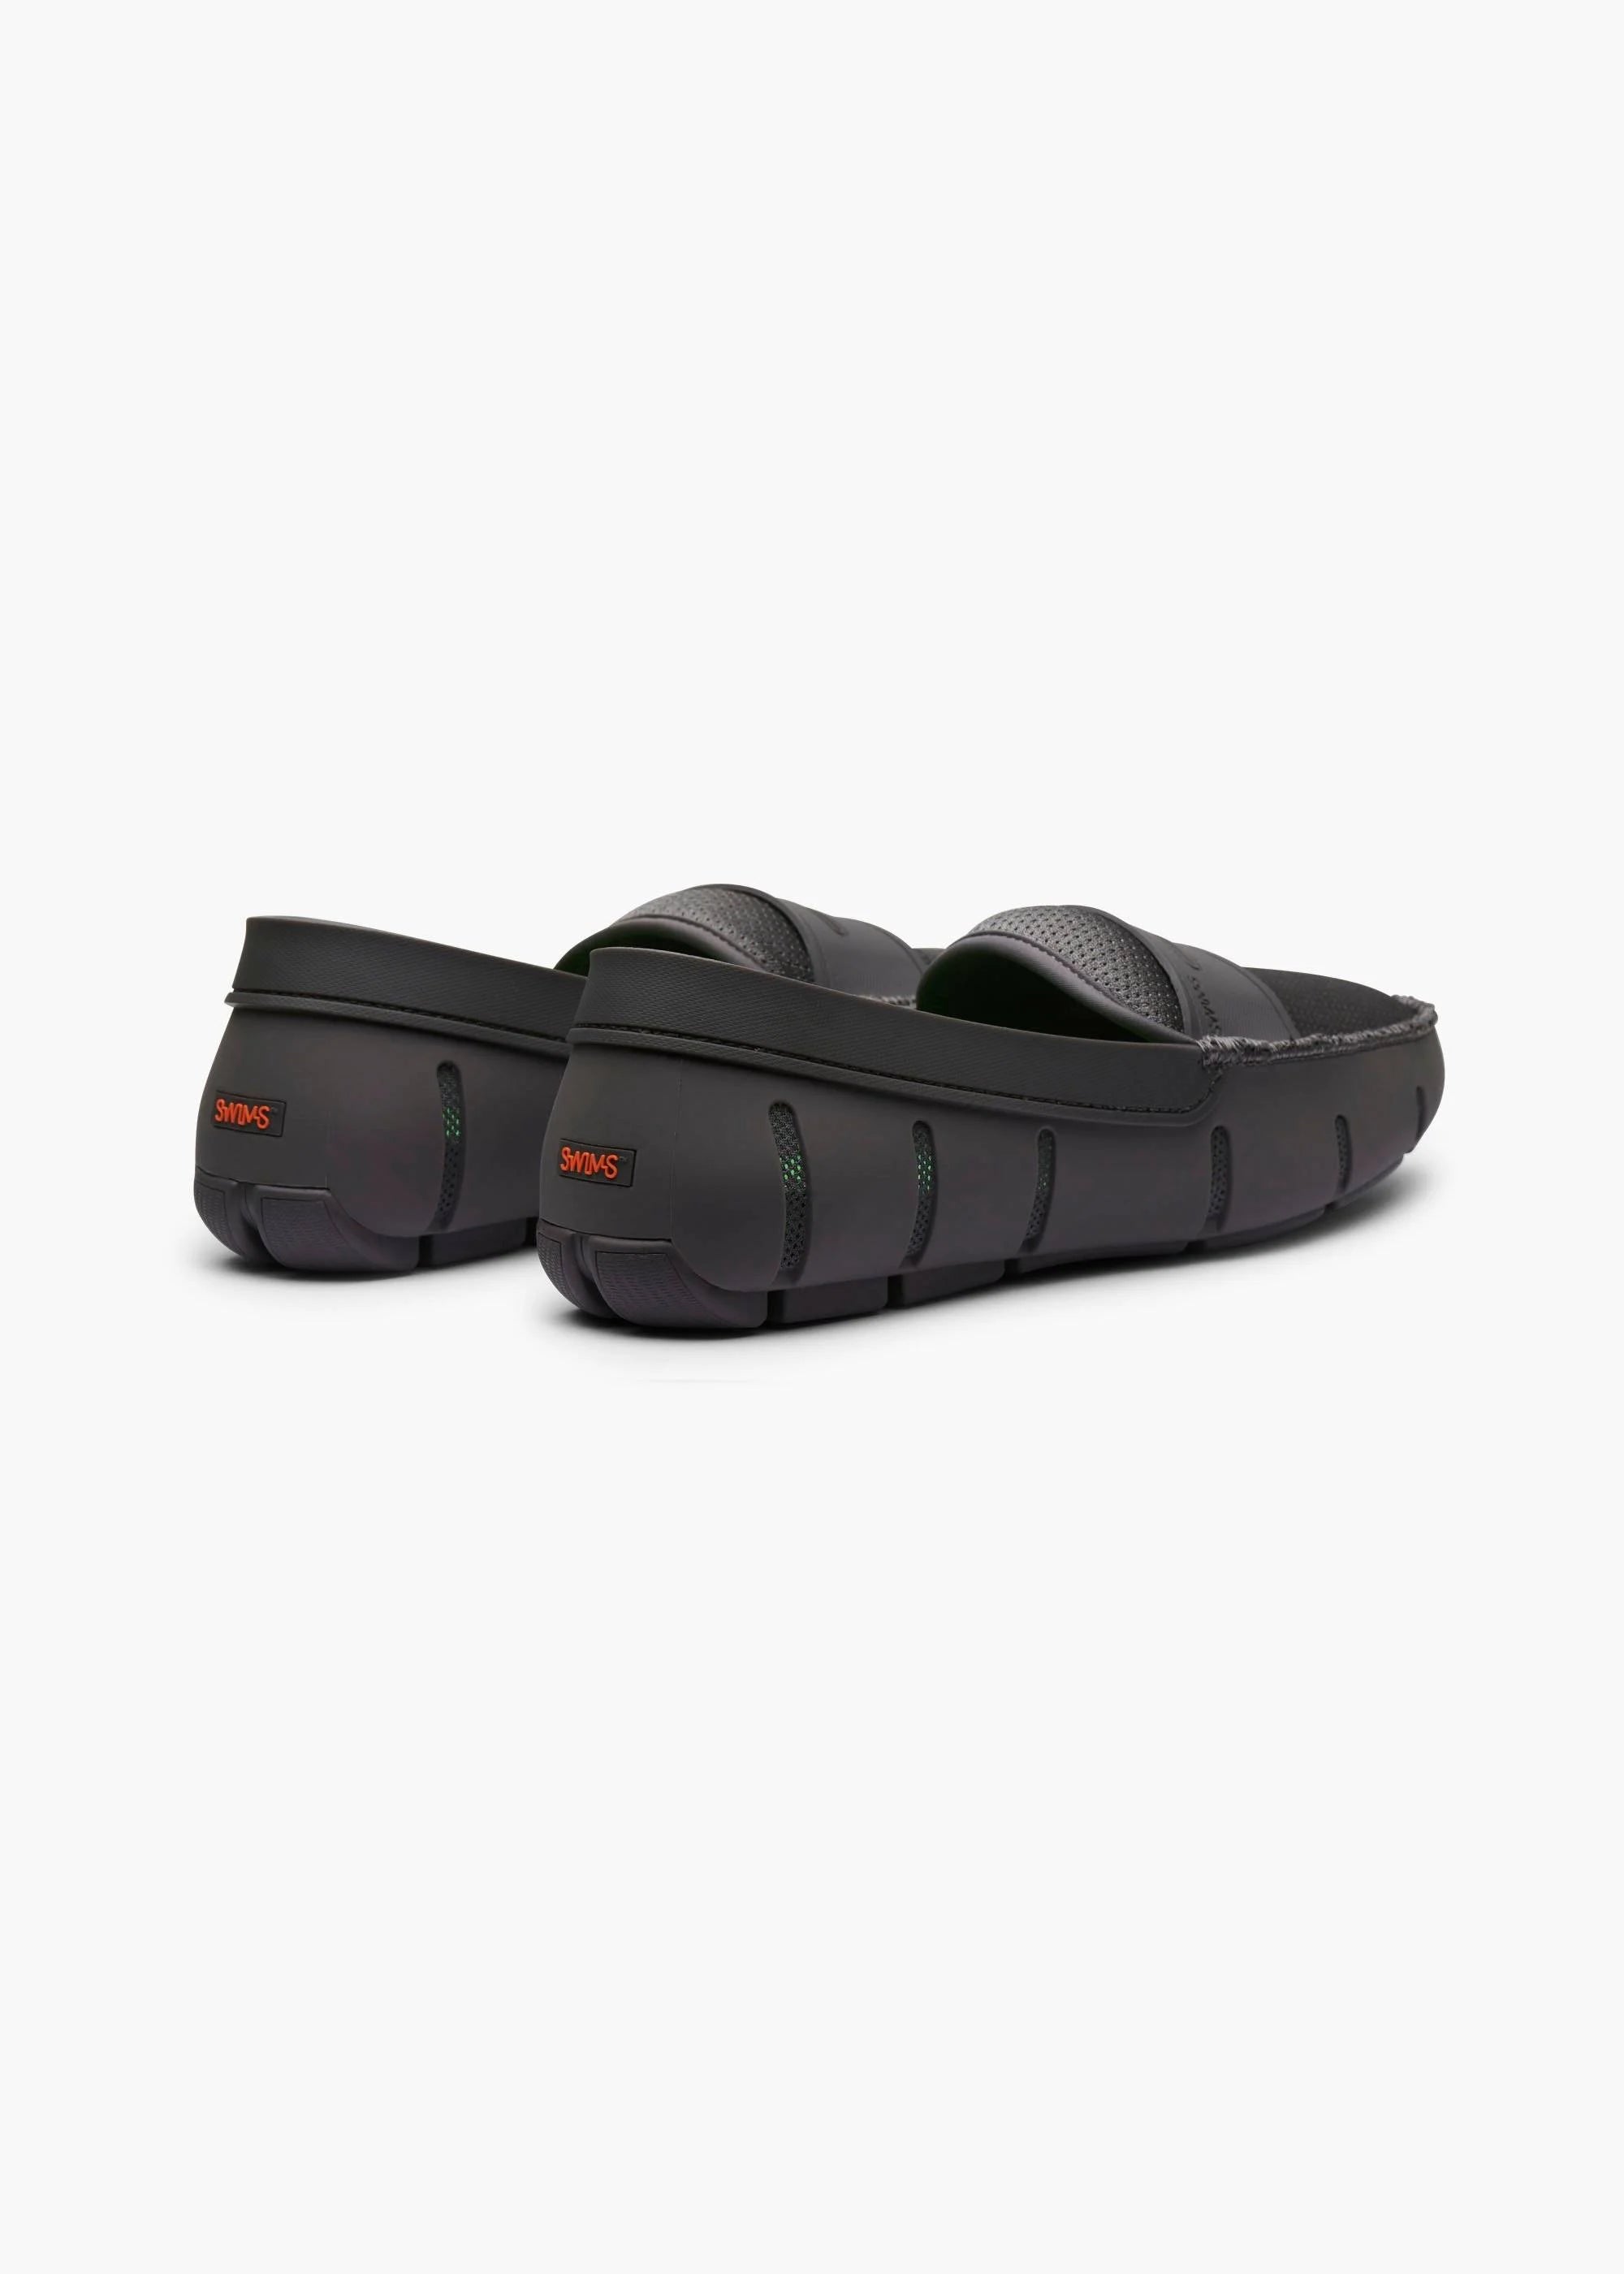 SWIMS - PENNY LOAFER in Charcoal 21201-011